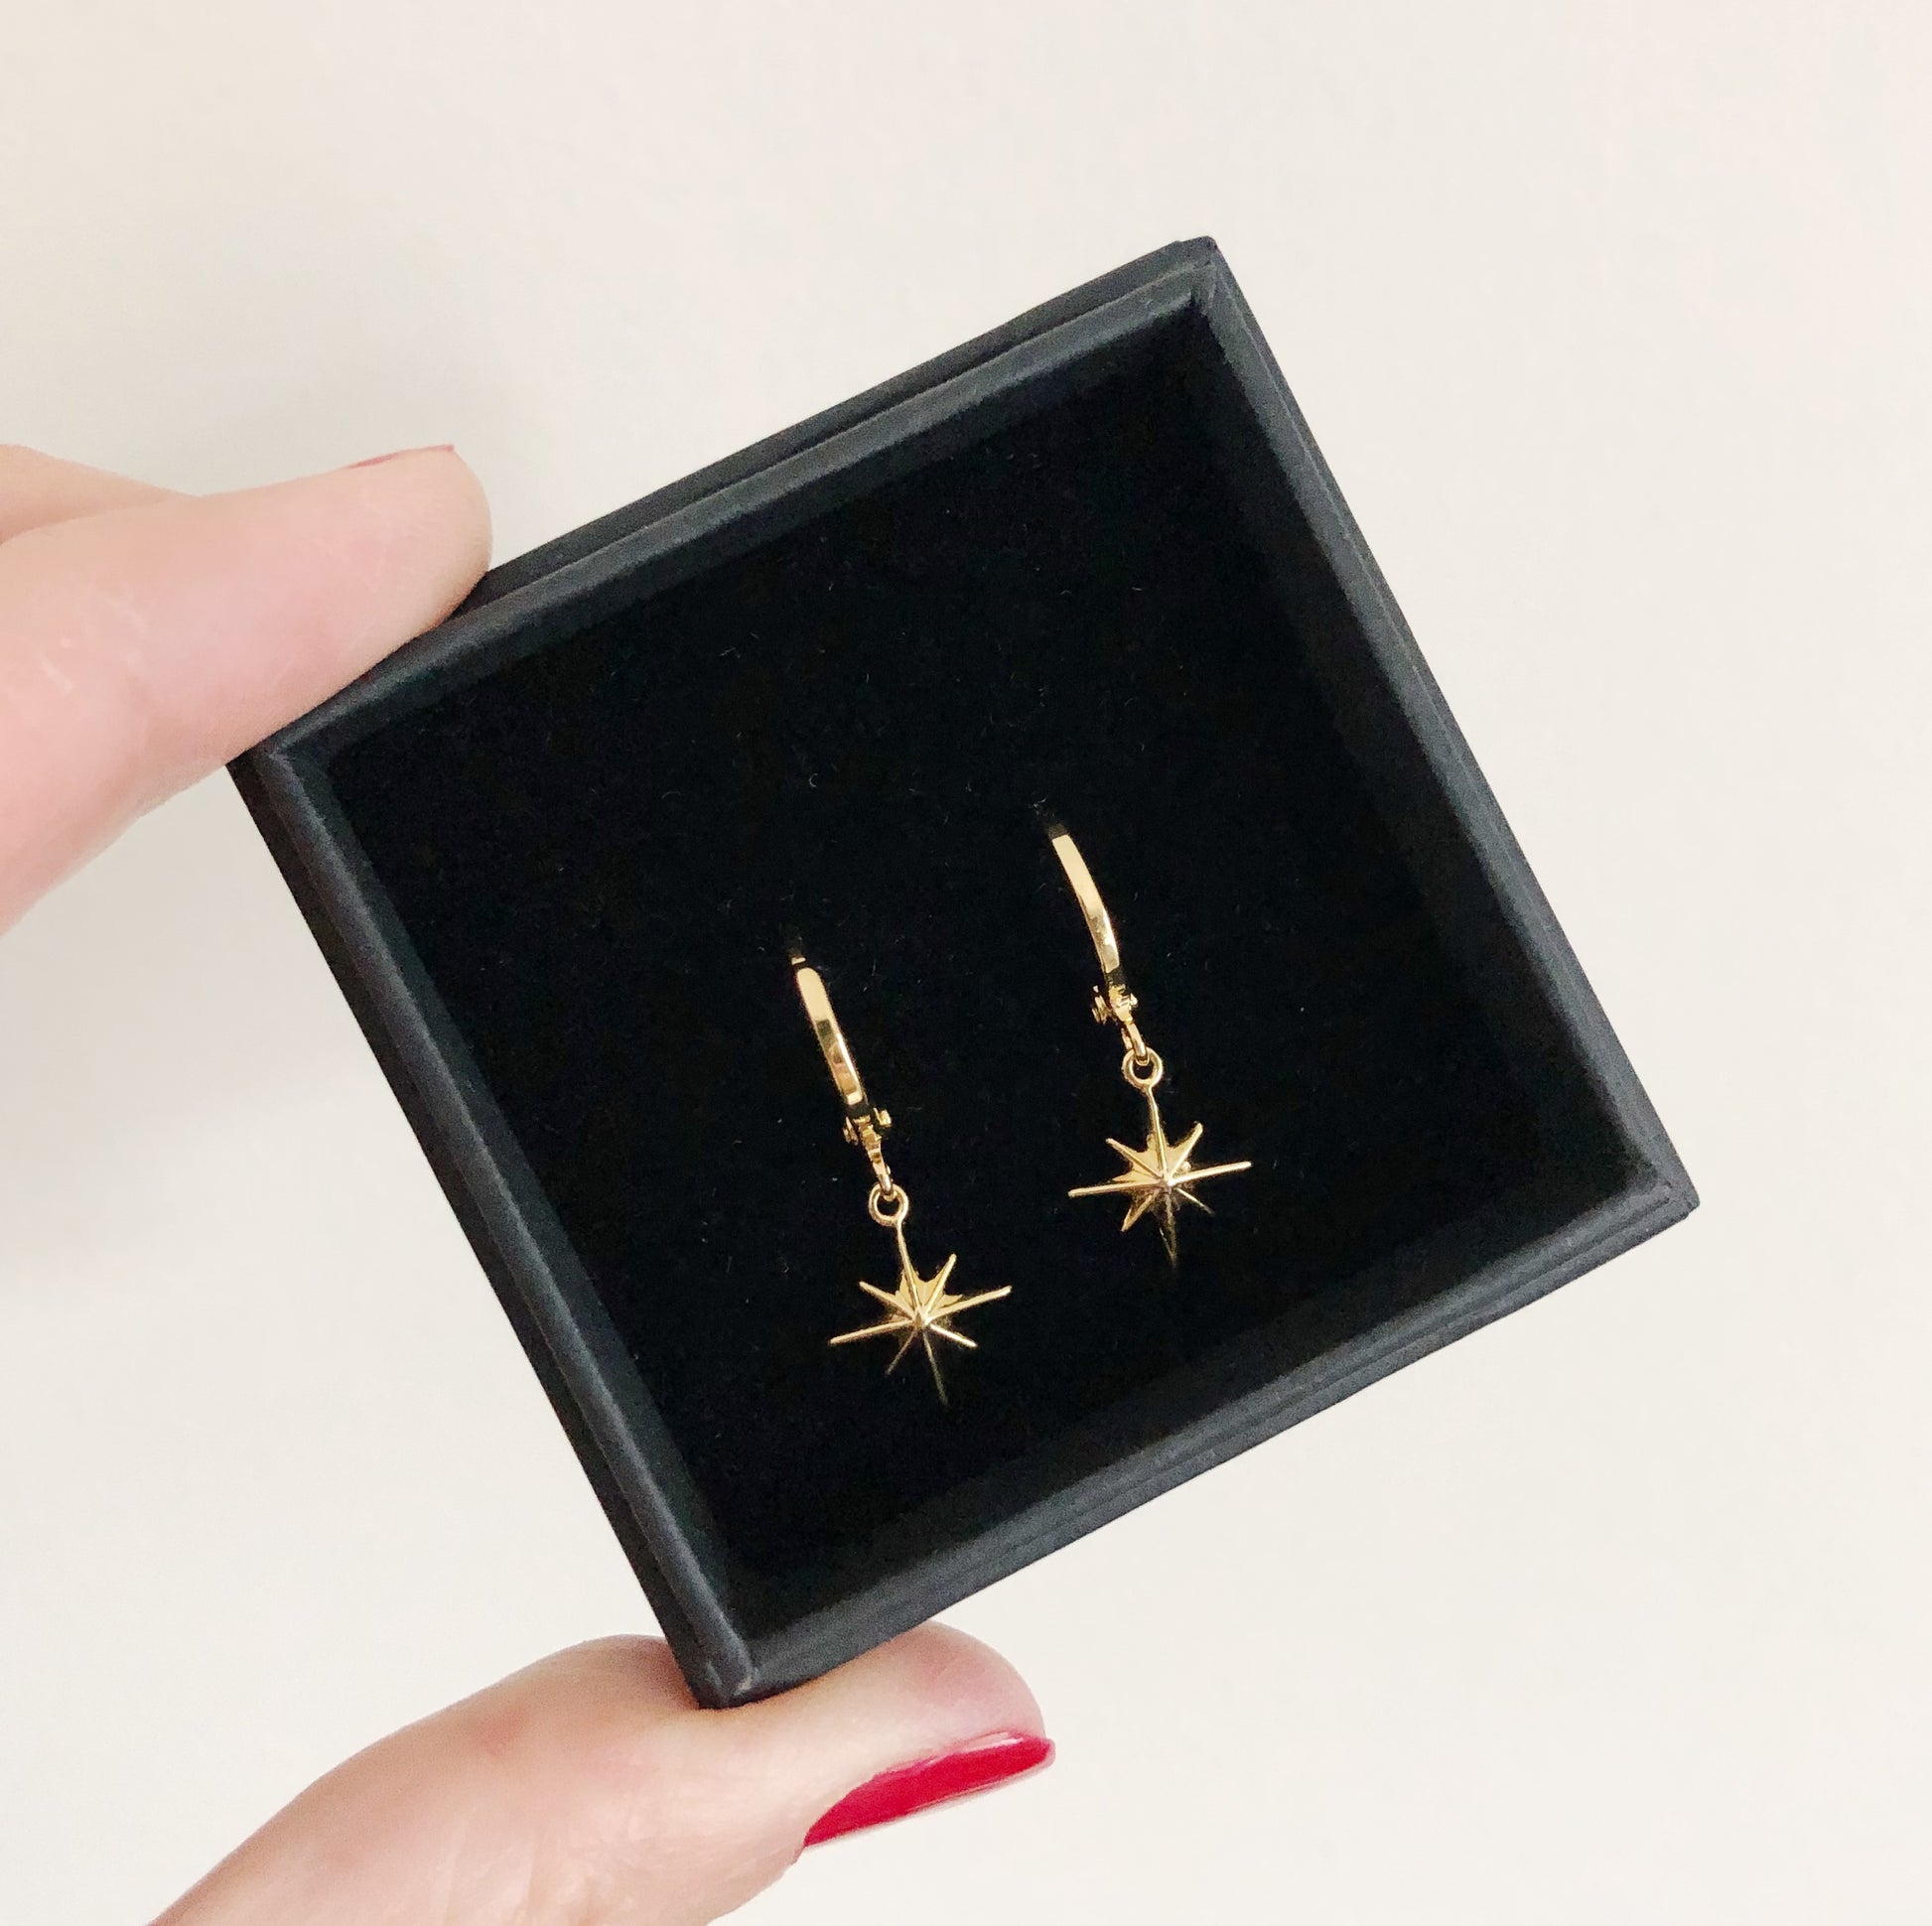 Tiny hoop earrings with a star charm in gold